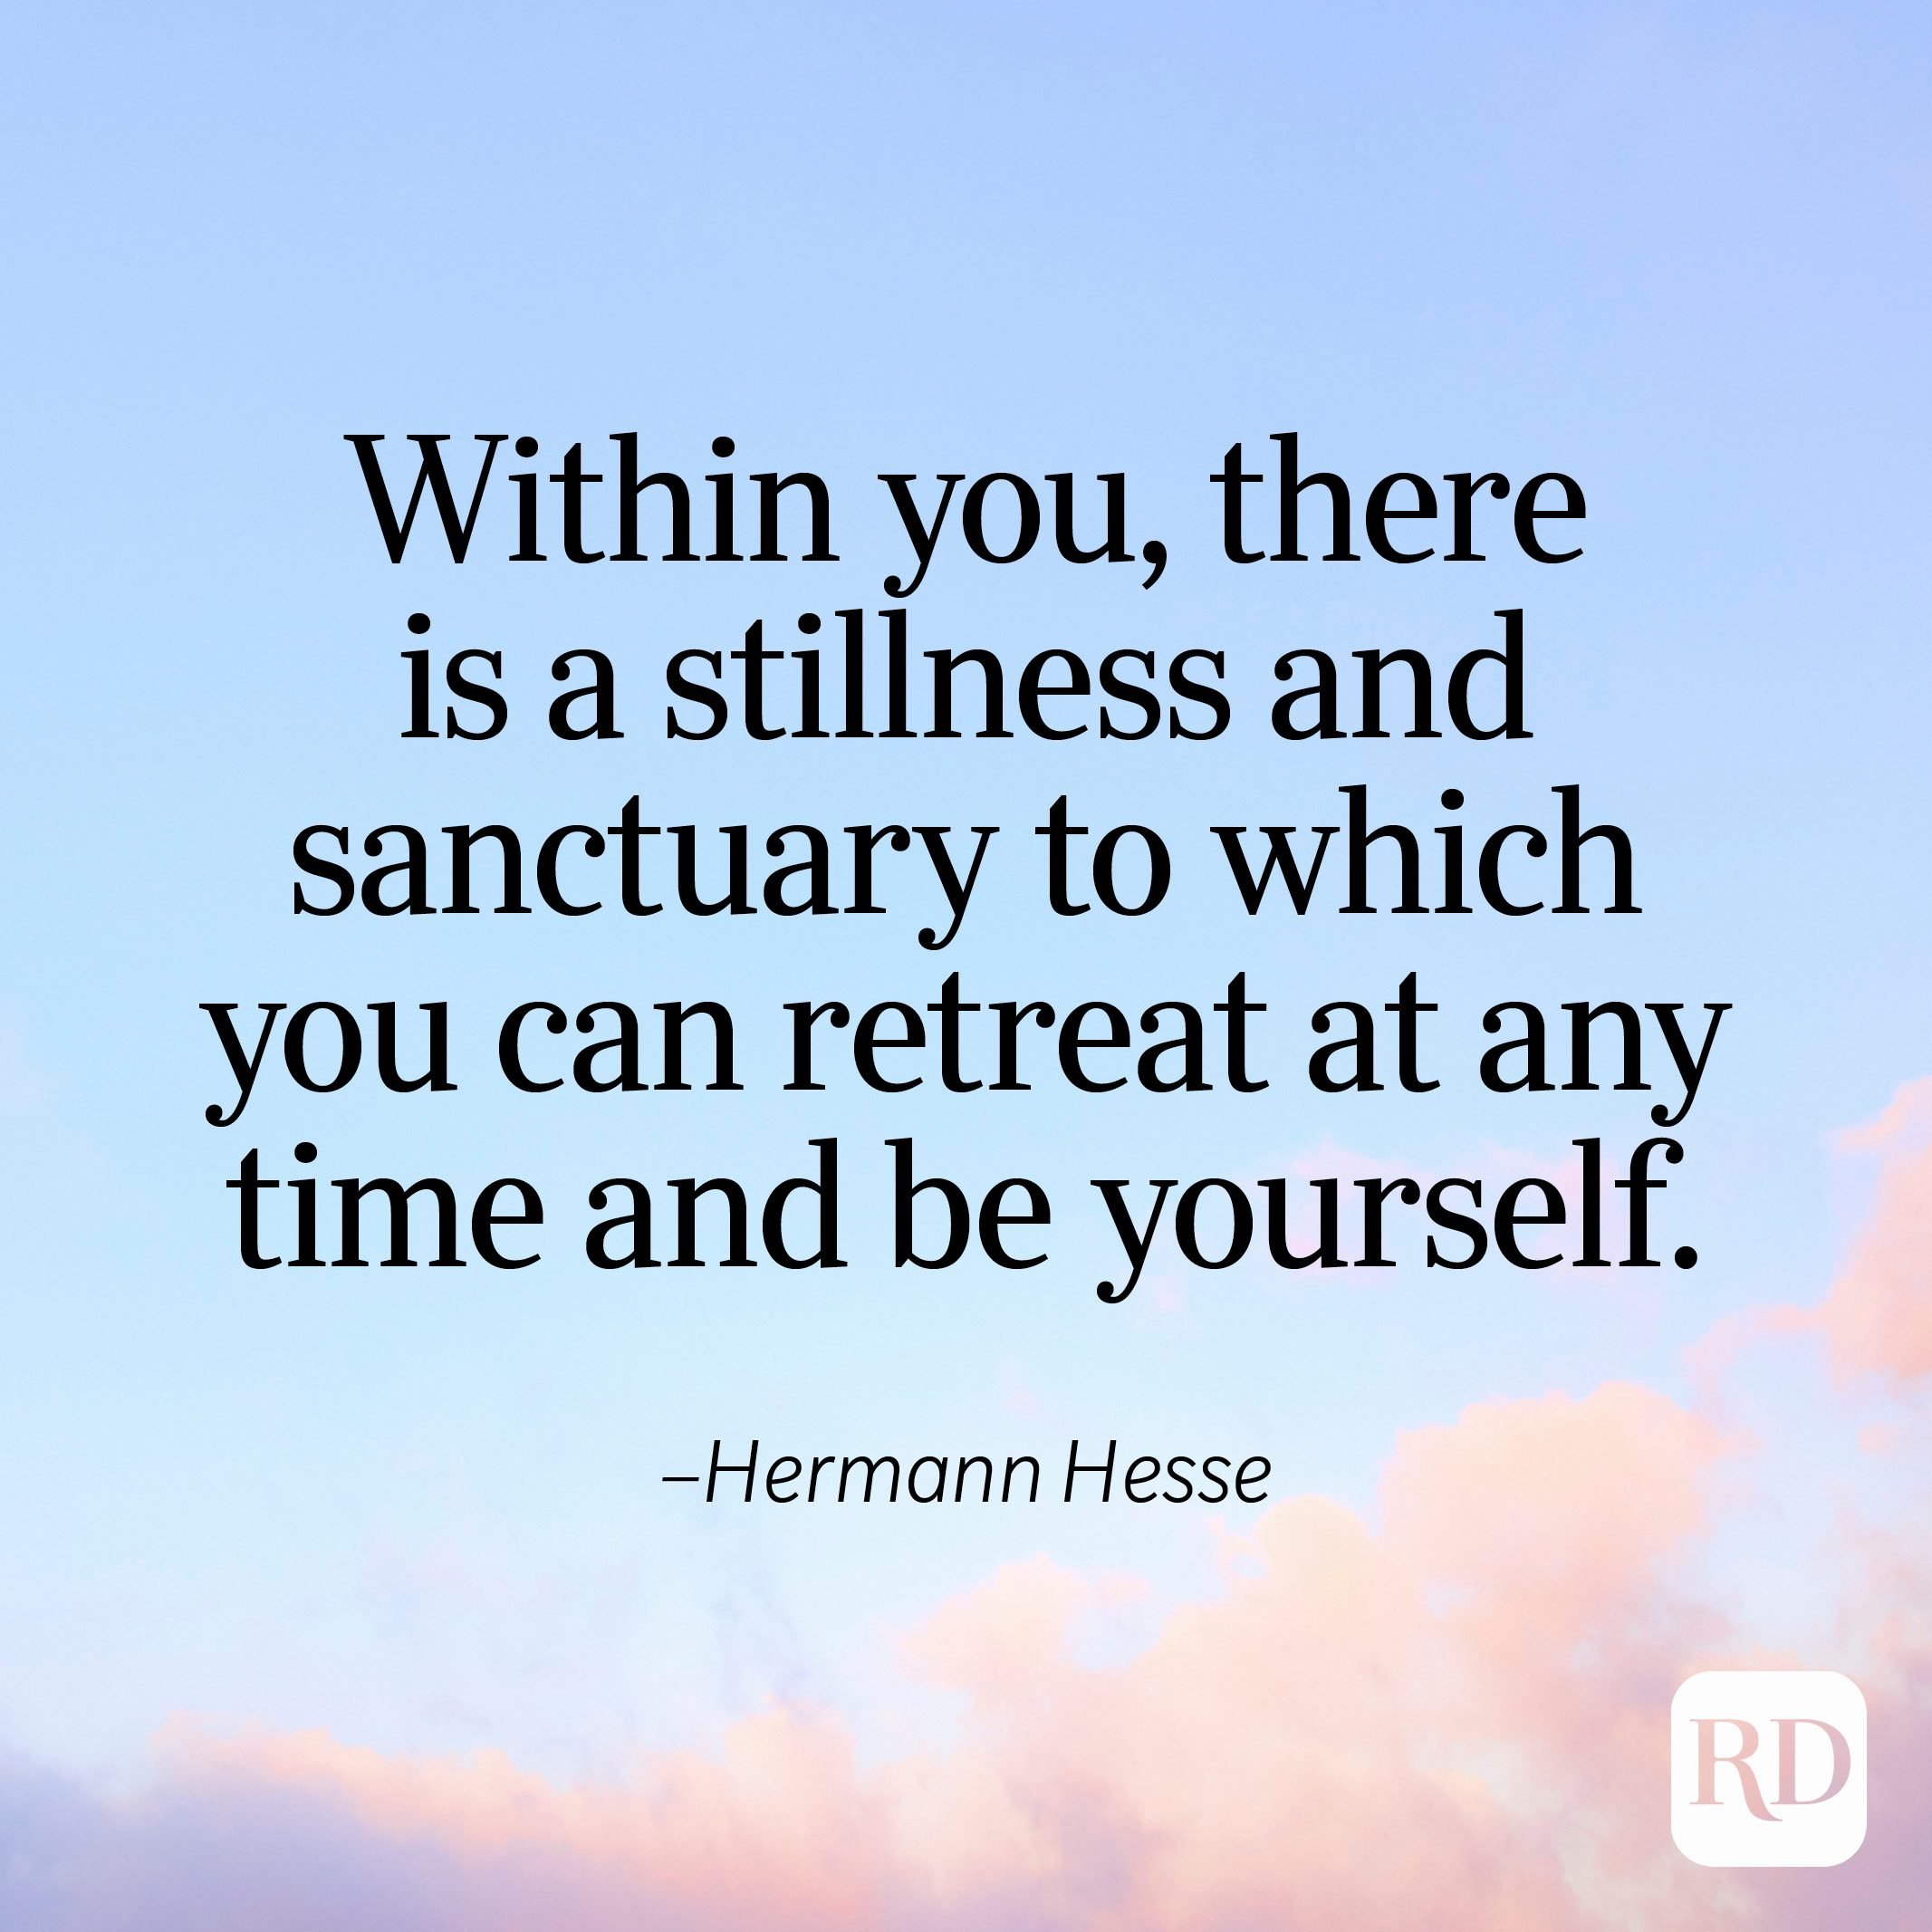 "Within you, there is a stillness and sanctuary to which you can retreat at any time and be yourself." —Hermann Hesse